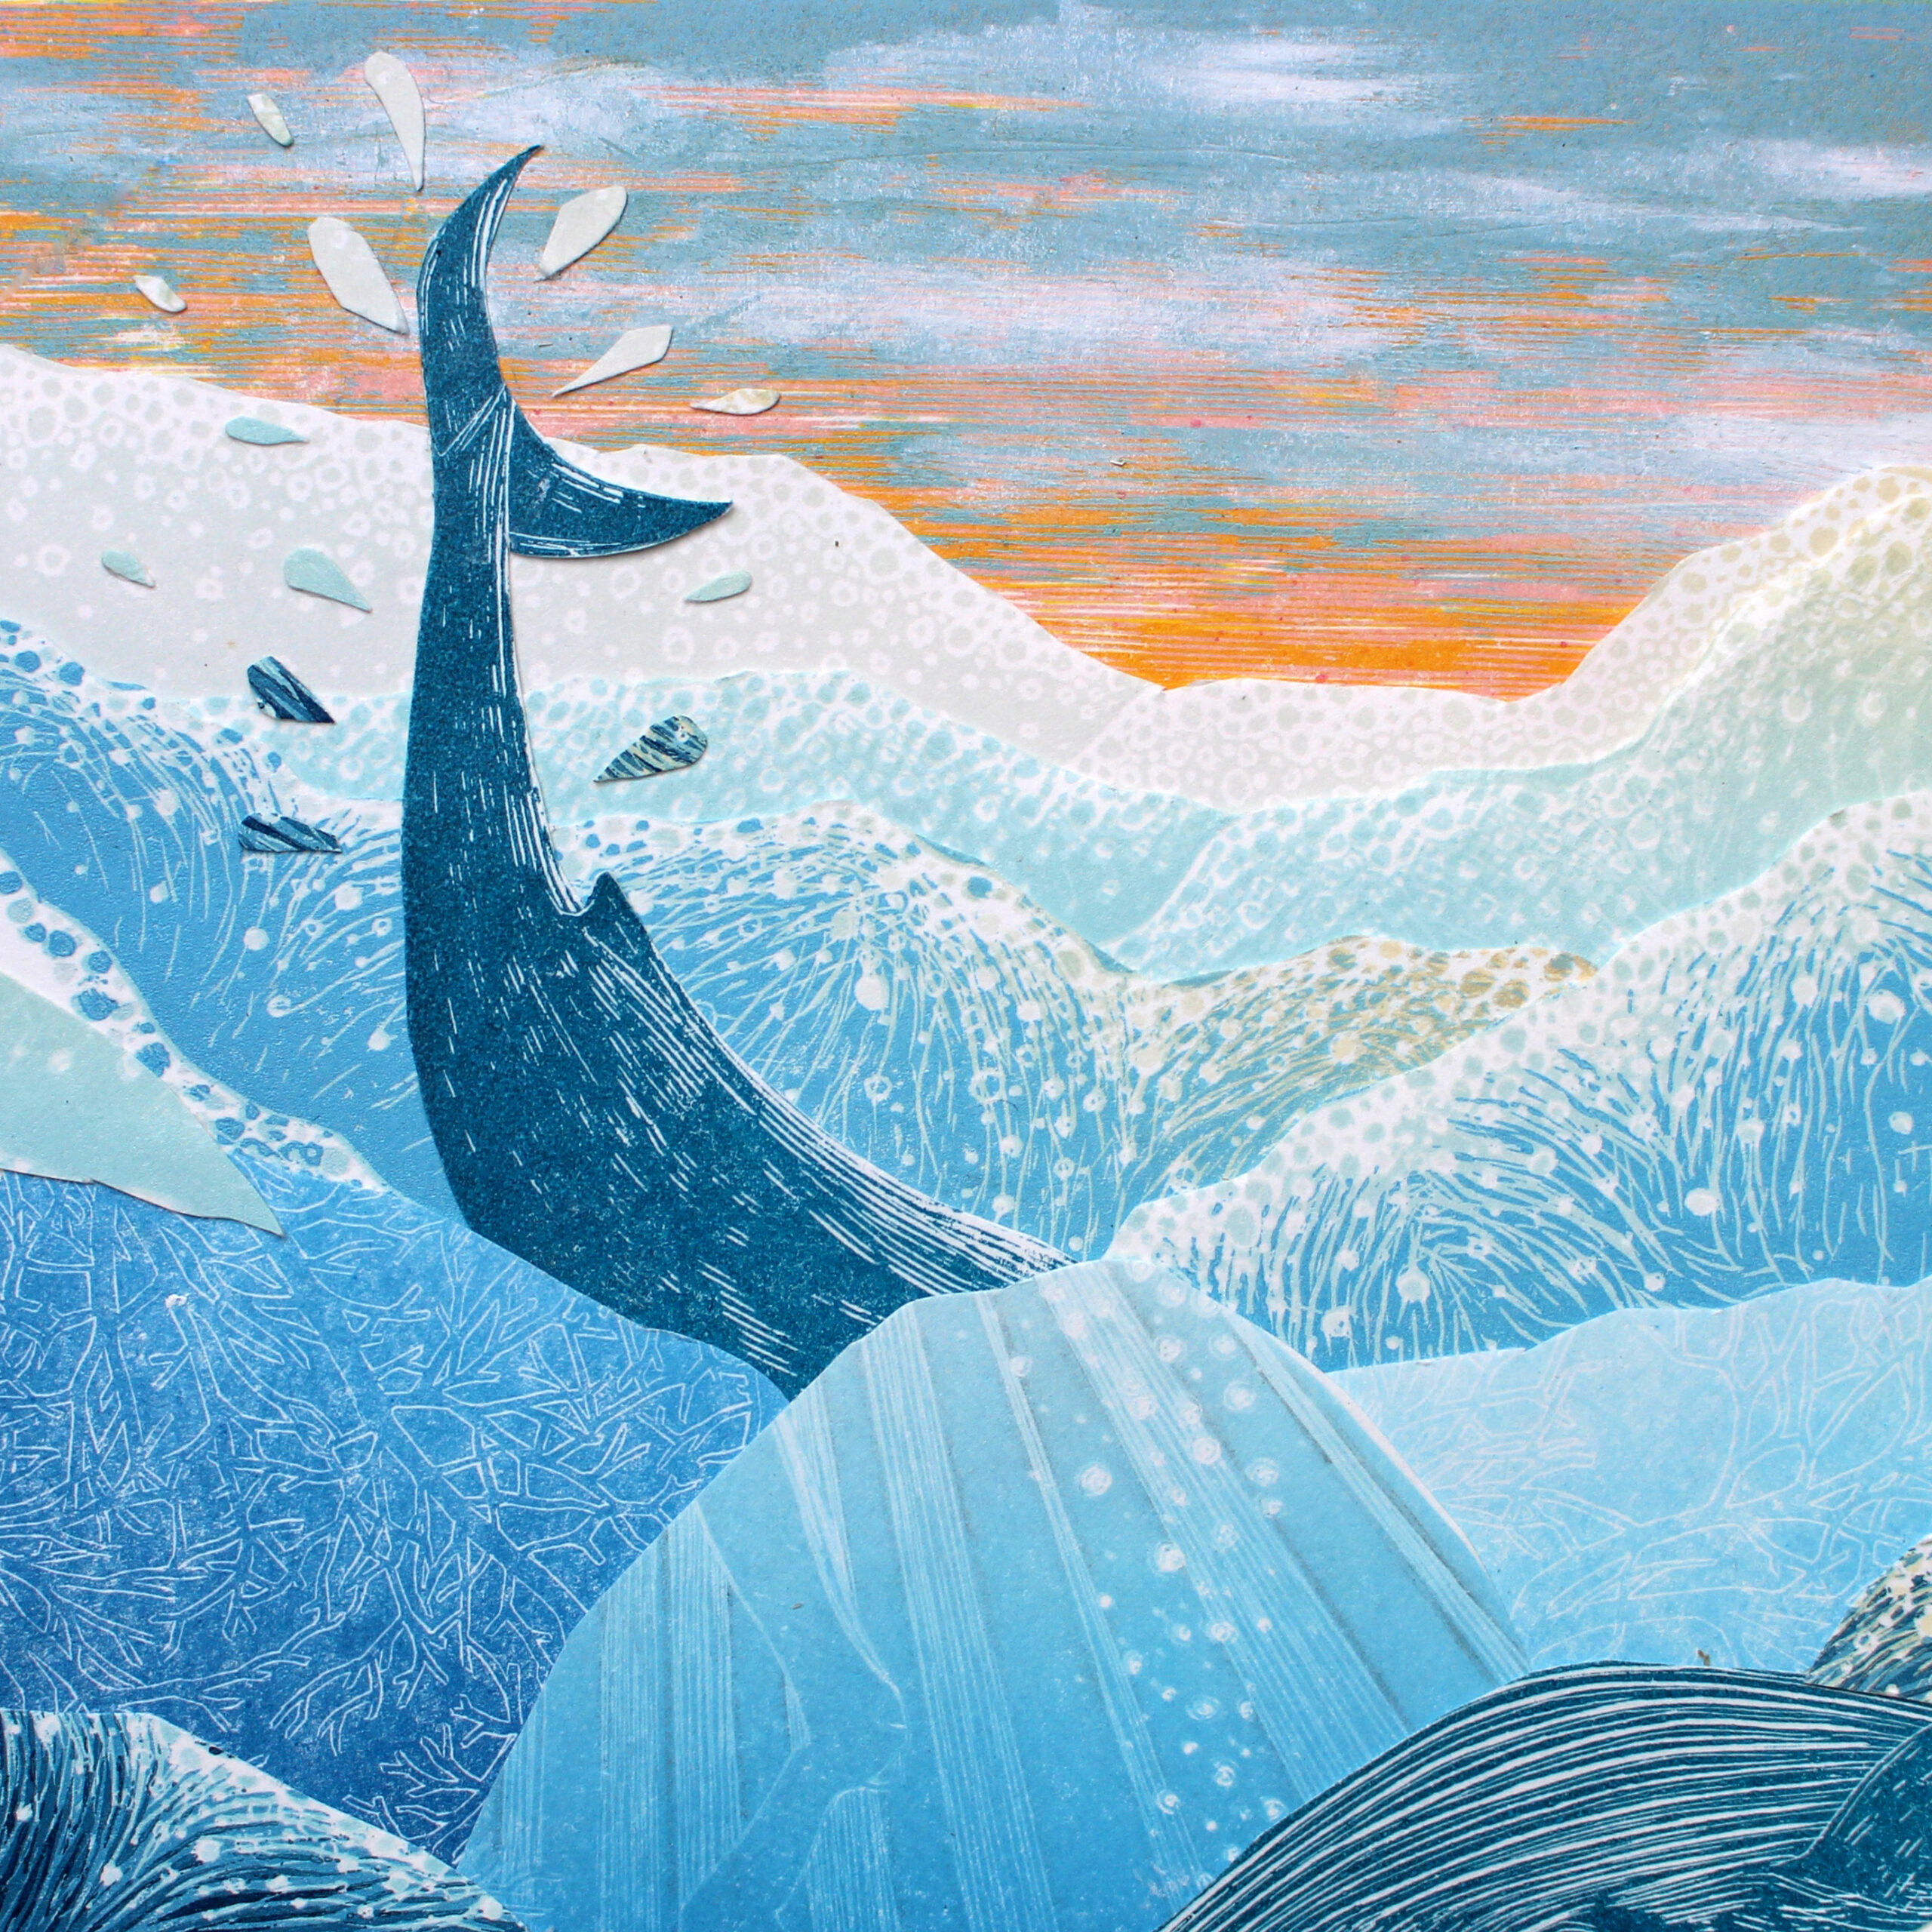 A dark blue whale tail splashing out of the top of blue waves with many different textures and tones, that appear almost mountainous, with an orange and blue and white sky in the background.